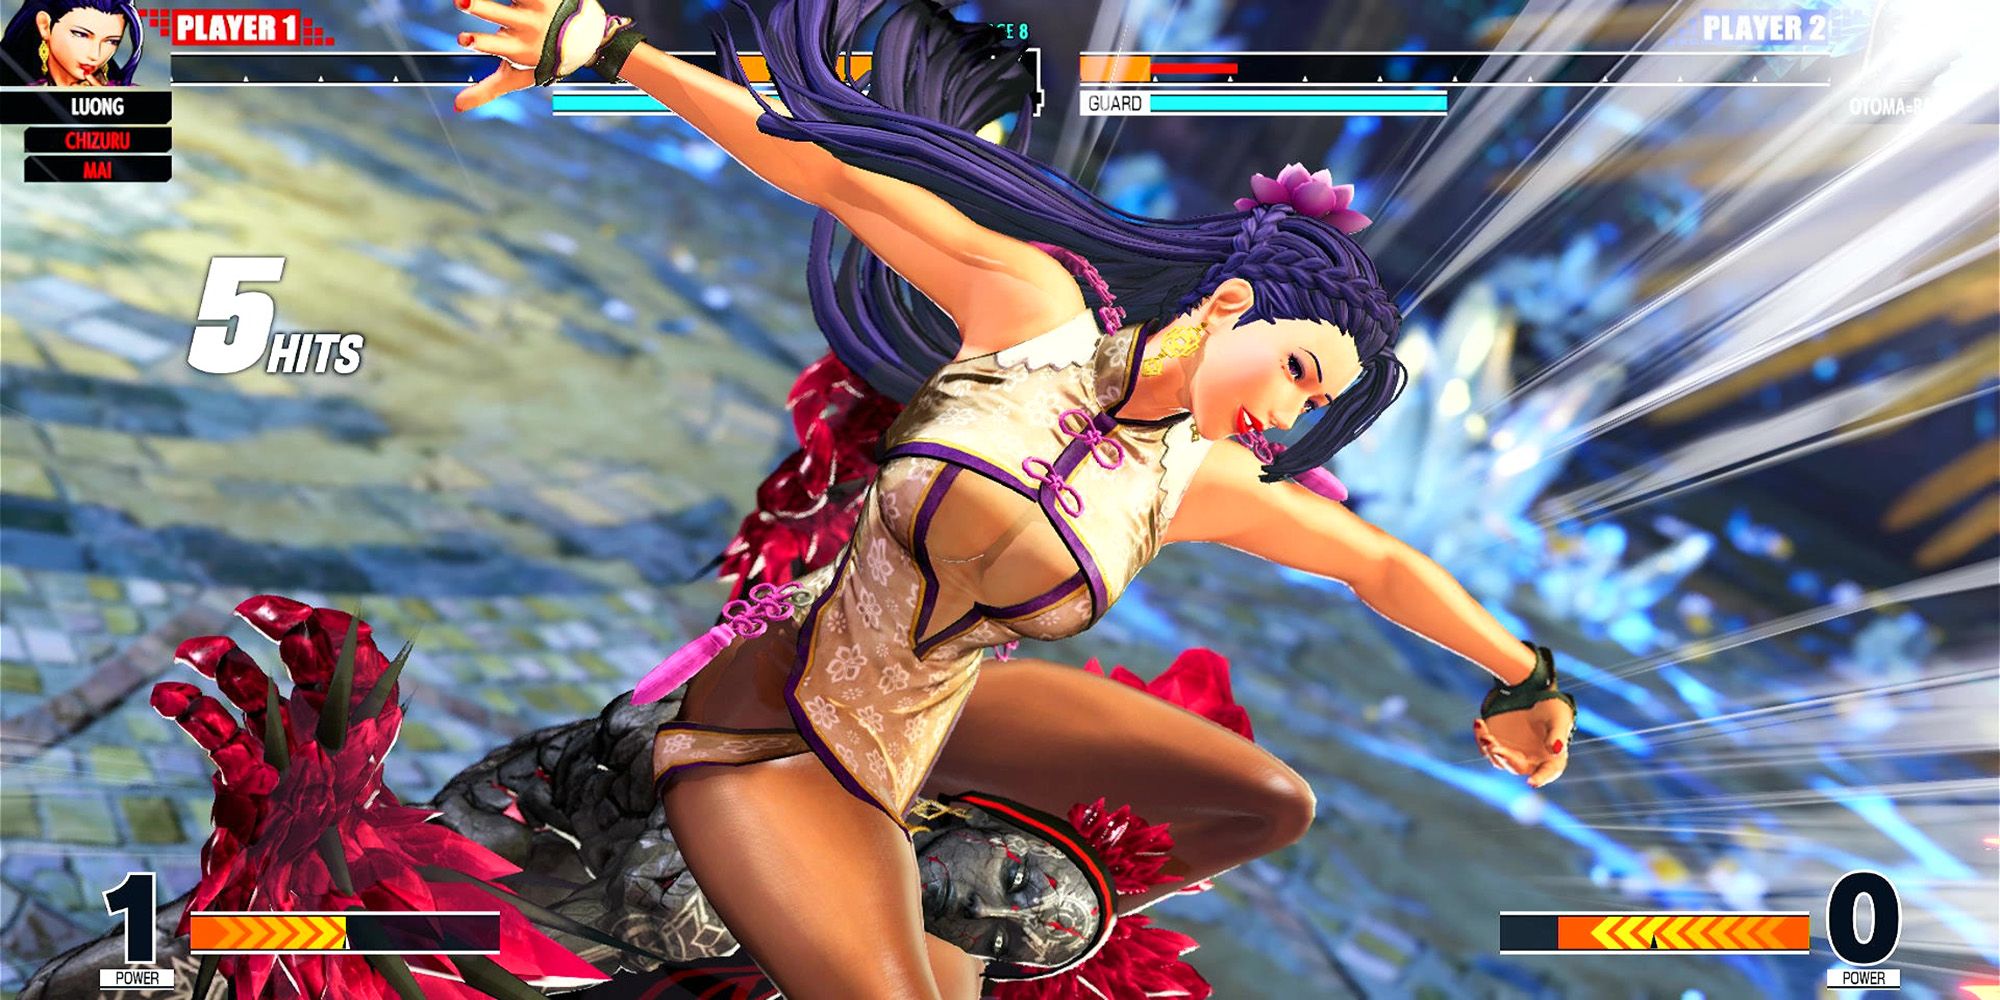 Otoma=Raga gets caught in a headlock between Luong's thighs during her Climax Super Special Move, Ben, in the Crystallization Arena. The King Of Fighters 15. 